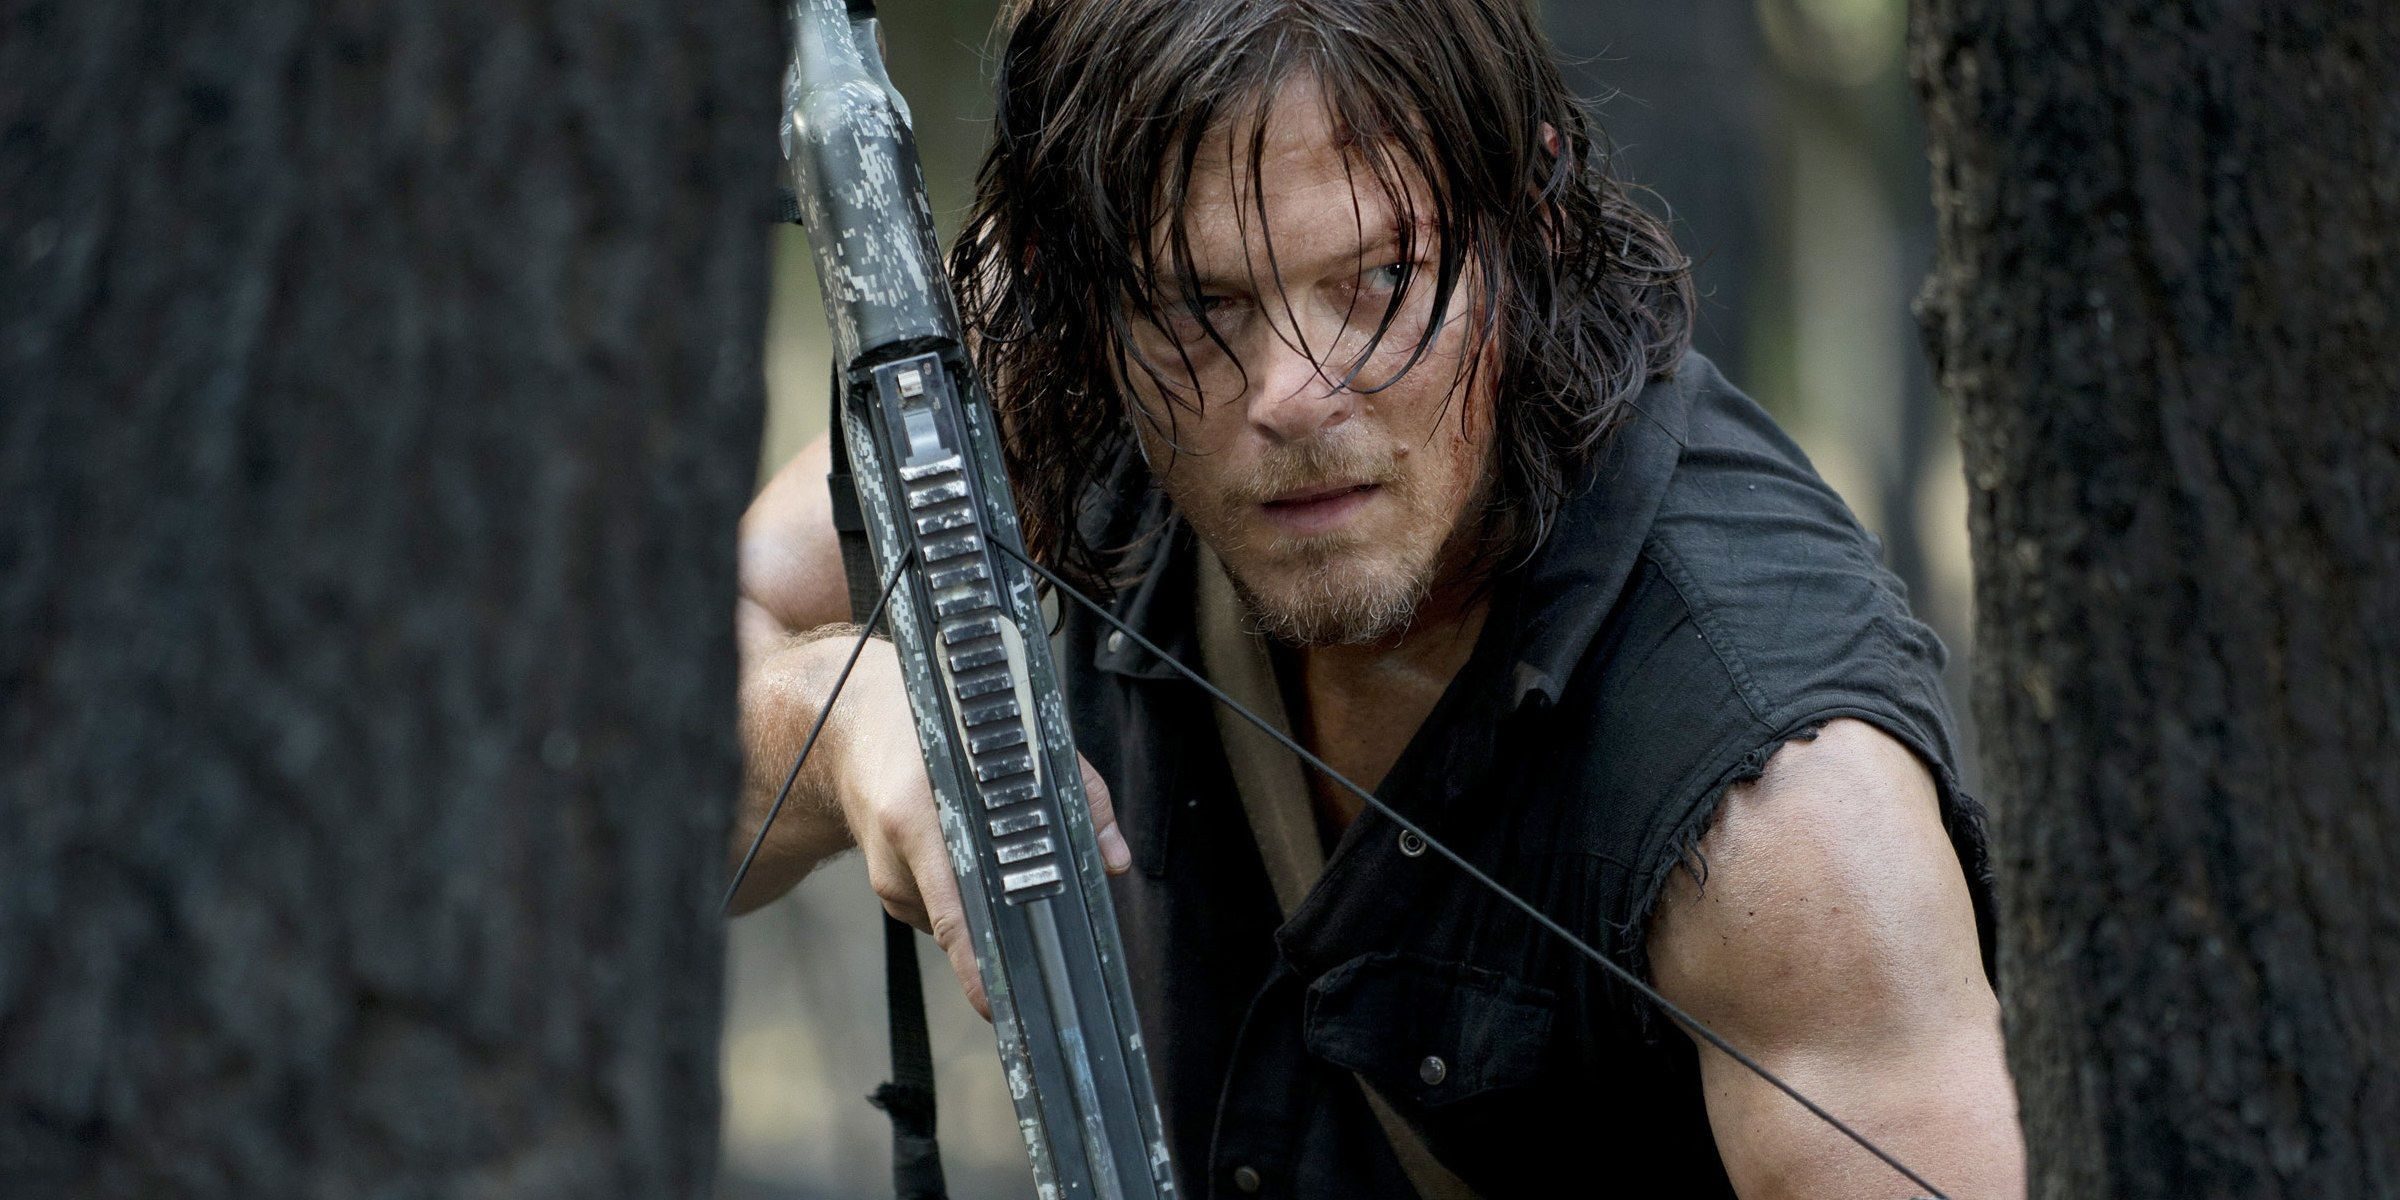 norman-reedus-as-daryl-dixon-in-the-walking-dead-5759921